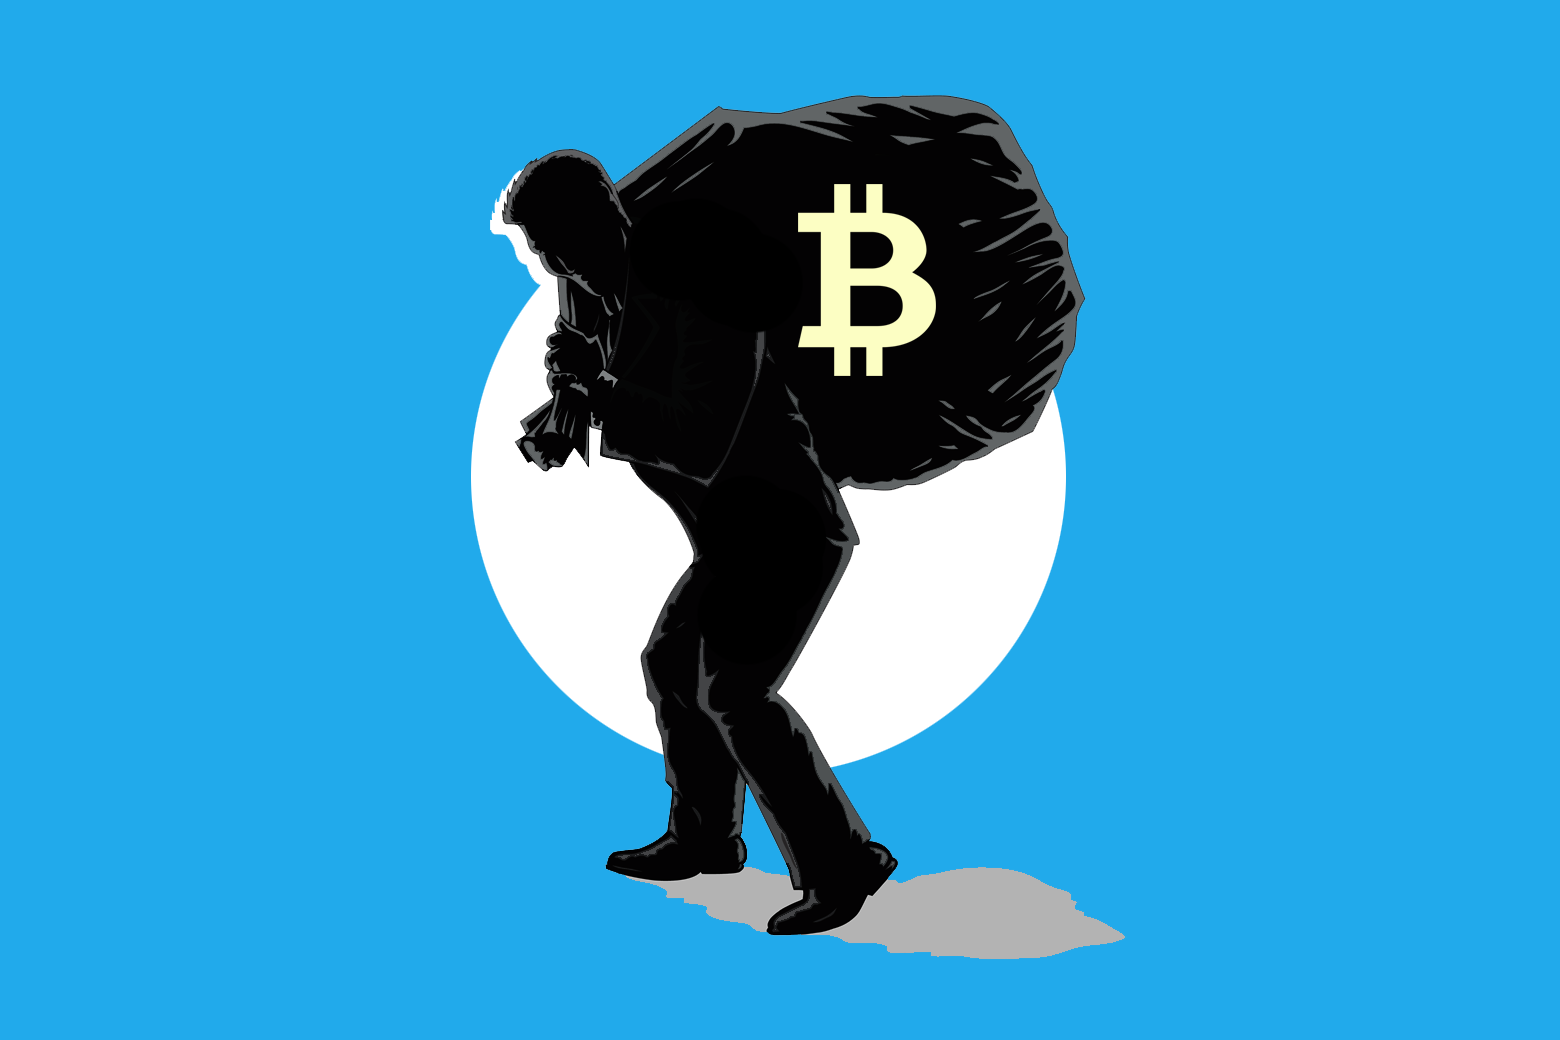 Photo illustration of a robber carrying a bag marked with a bitcoin symbol instead of cash